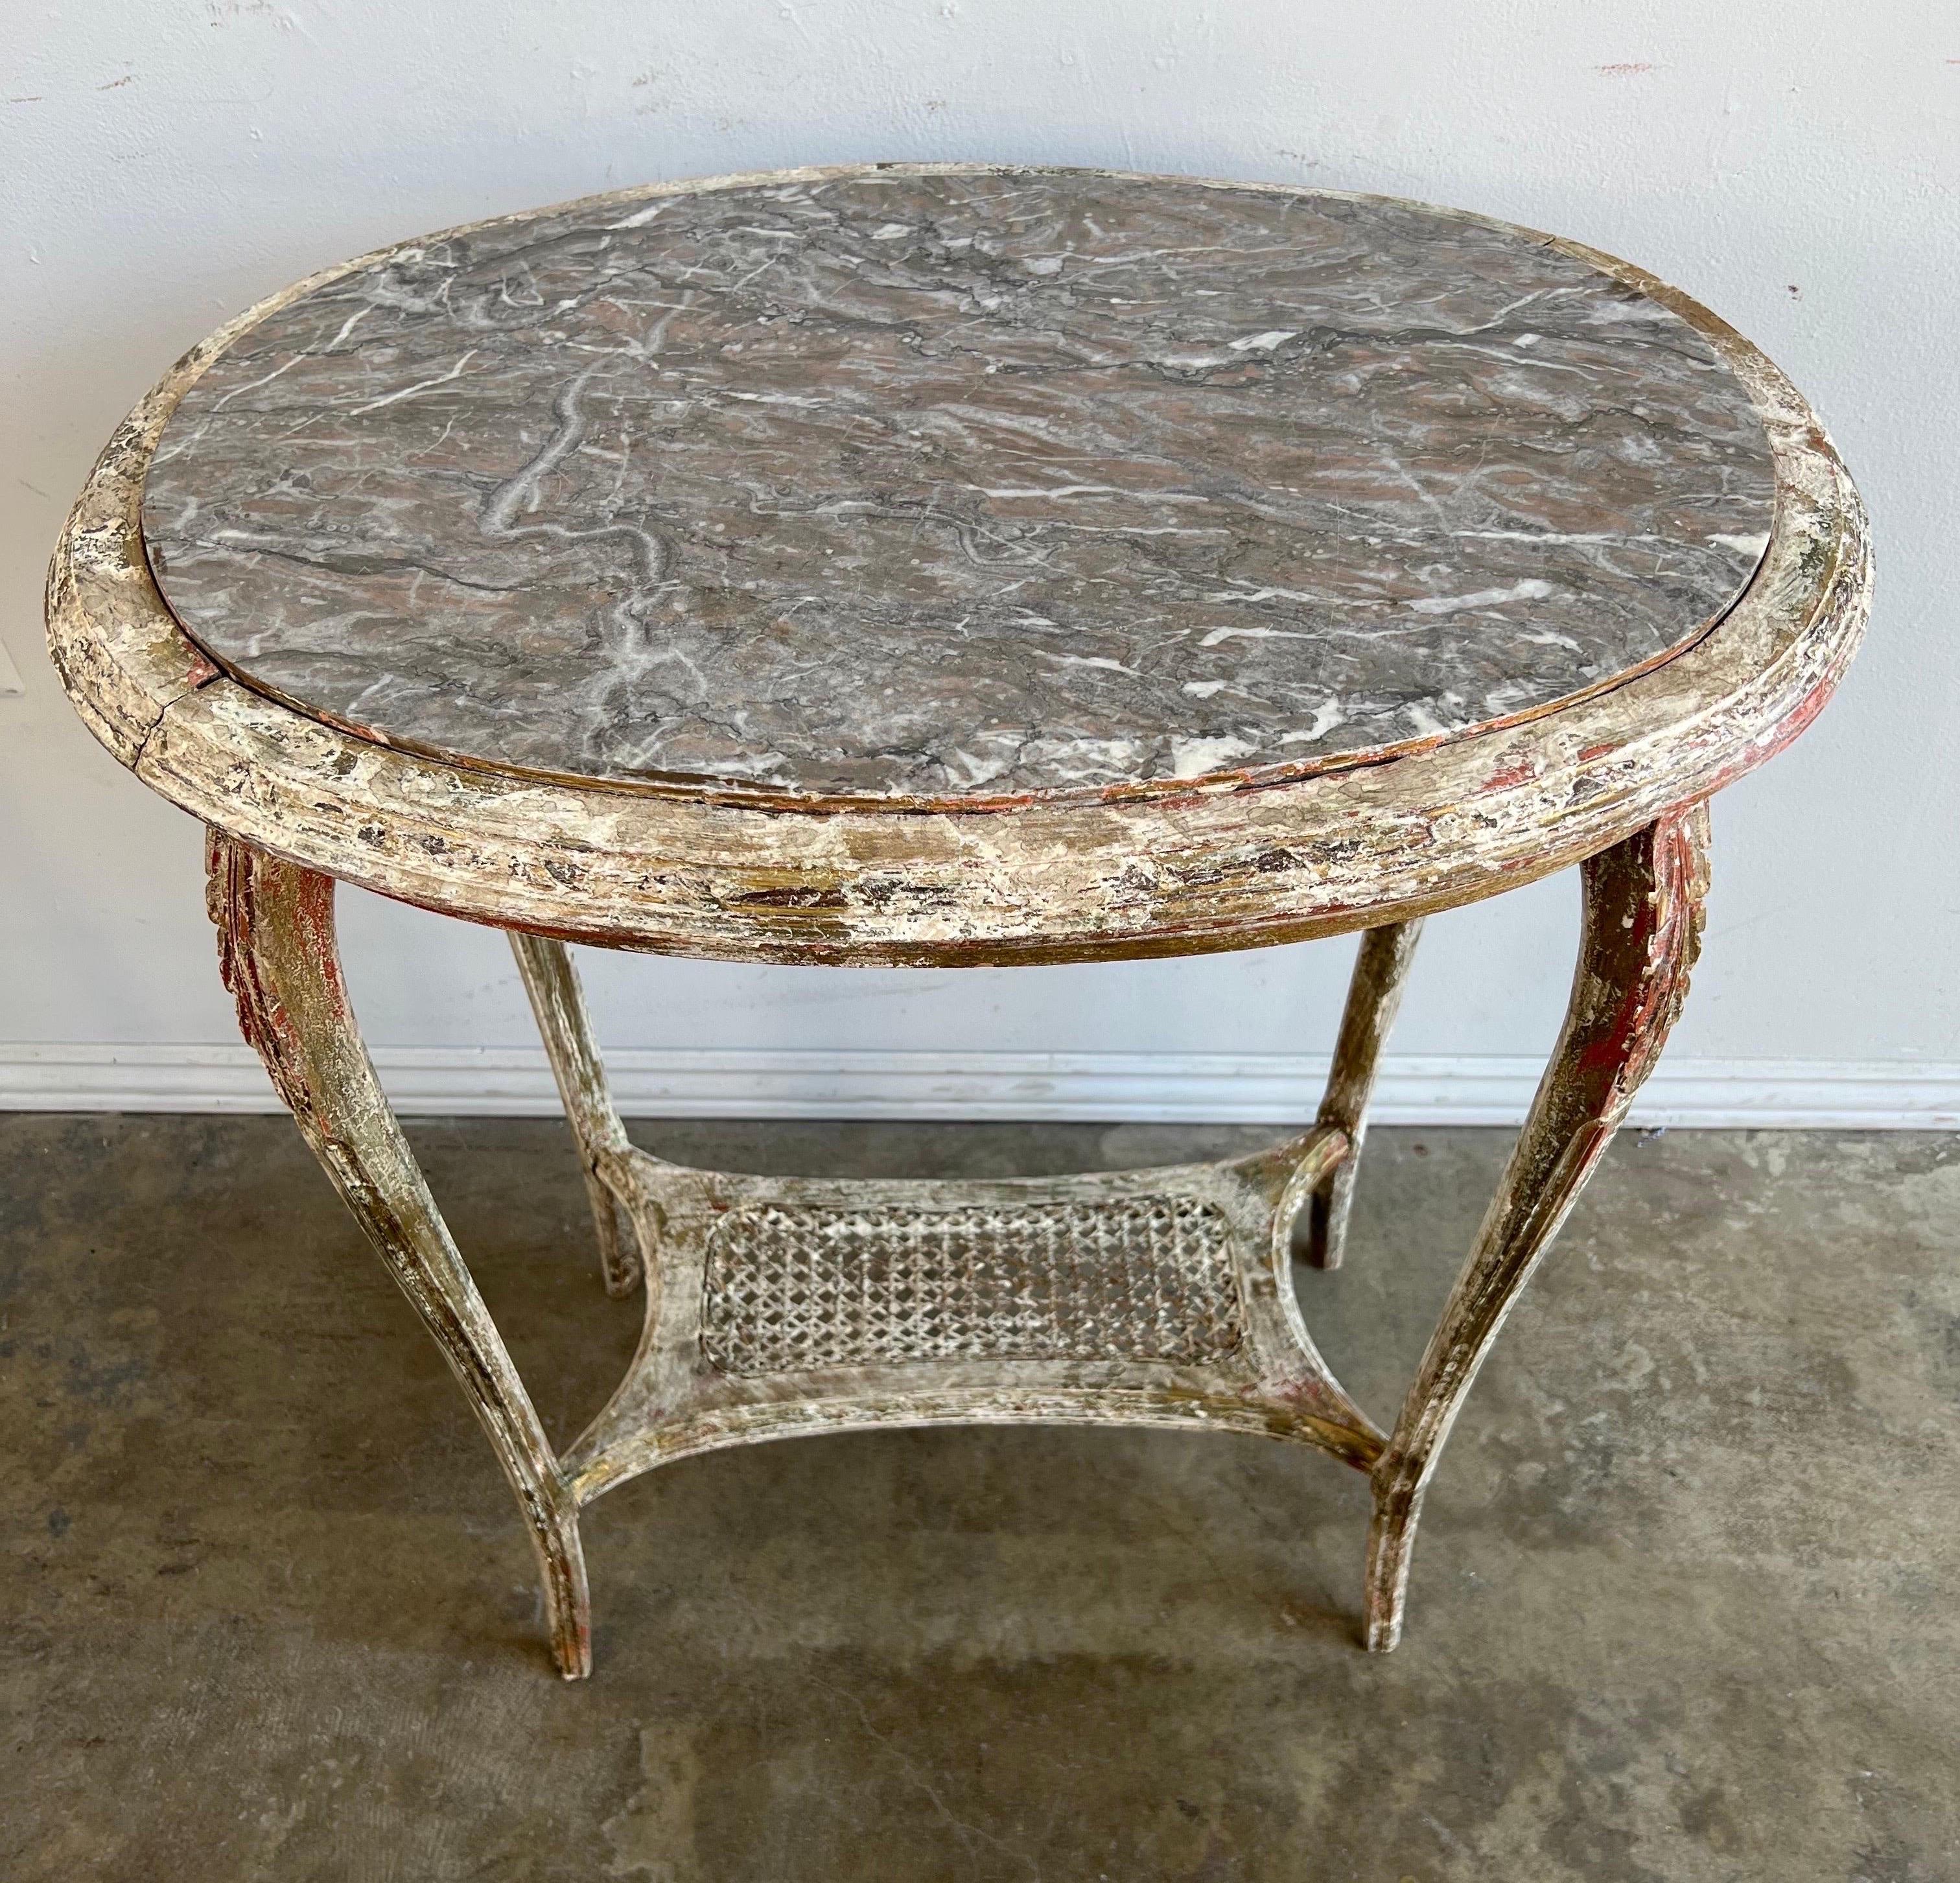 French Provincial French 19th C. Painted & Giltwood Side Table W/ Marble Top